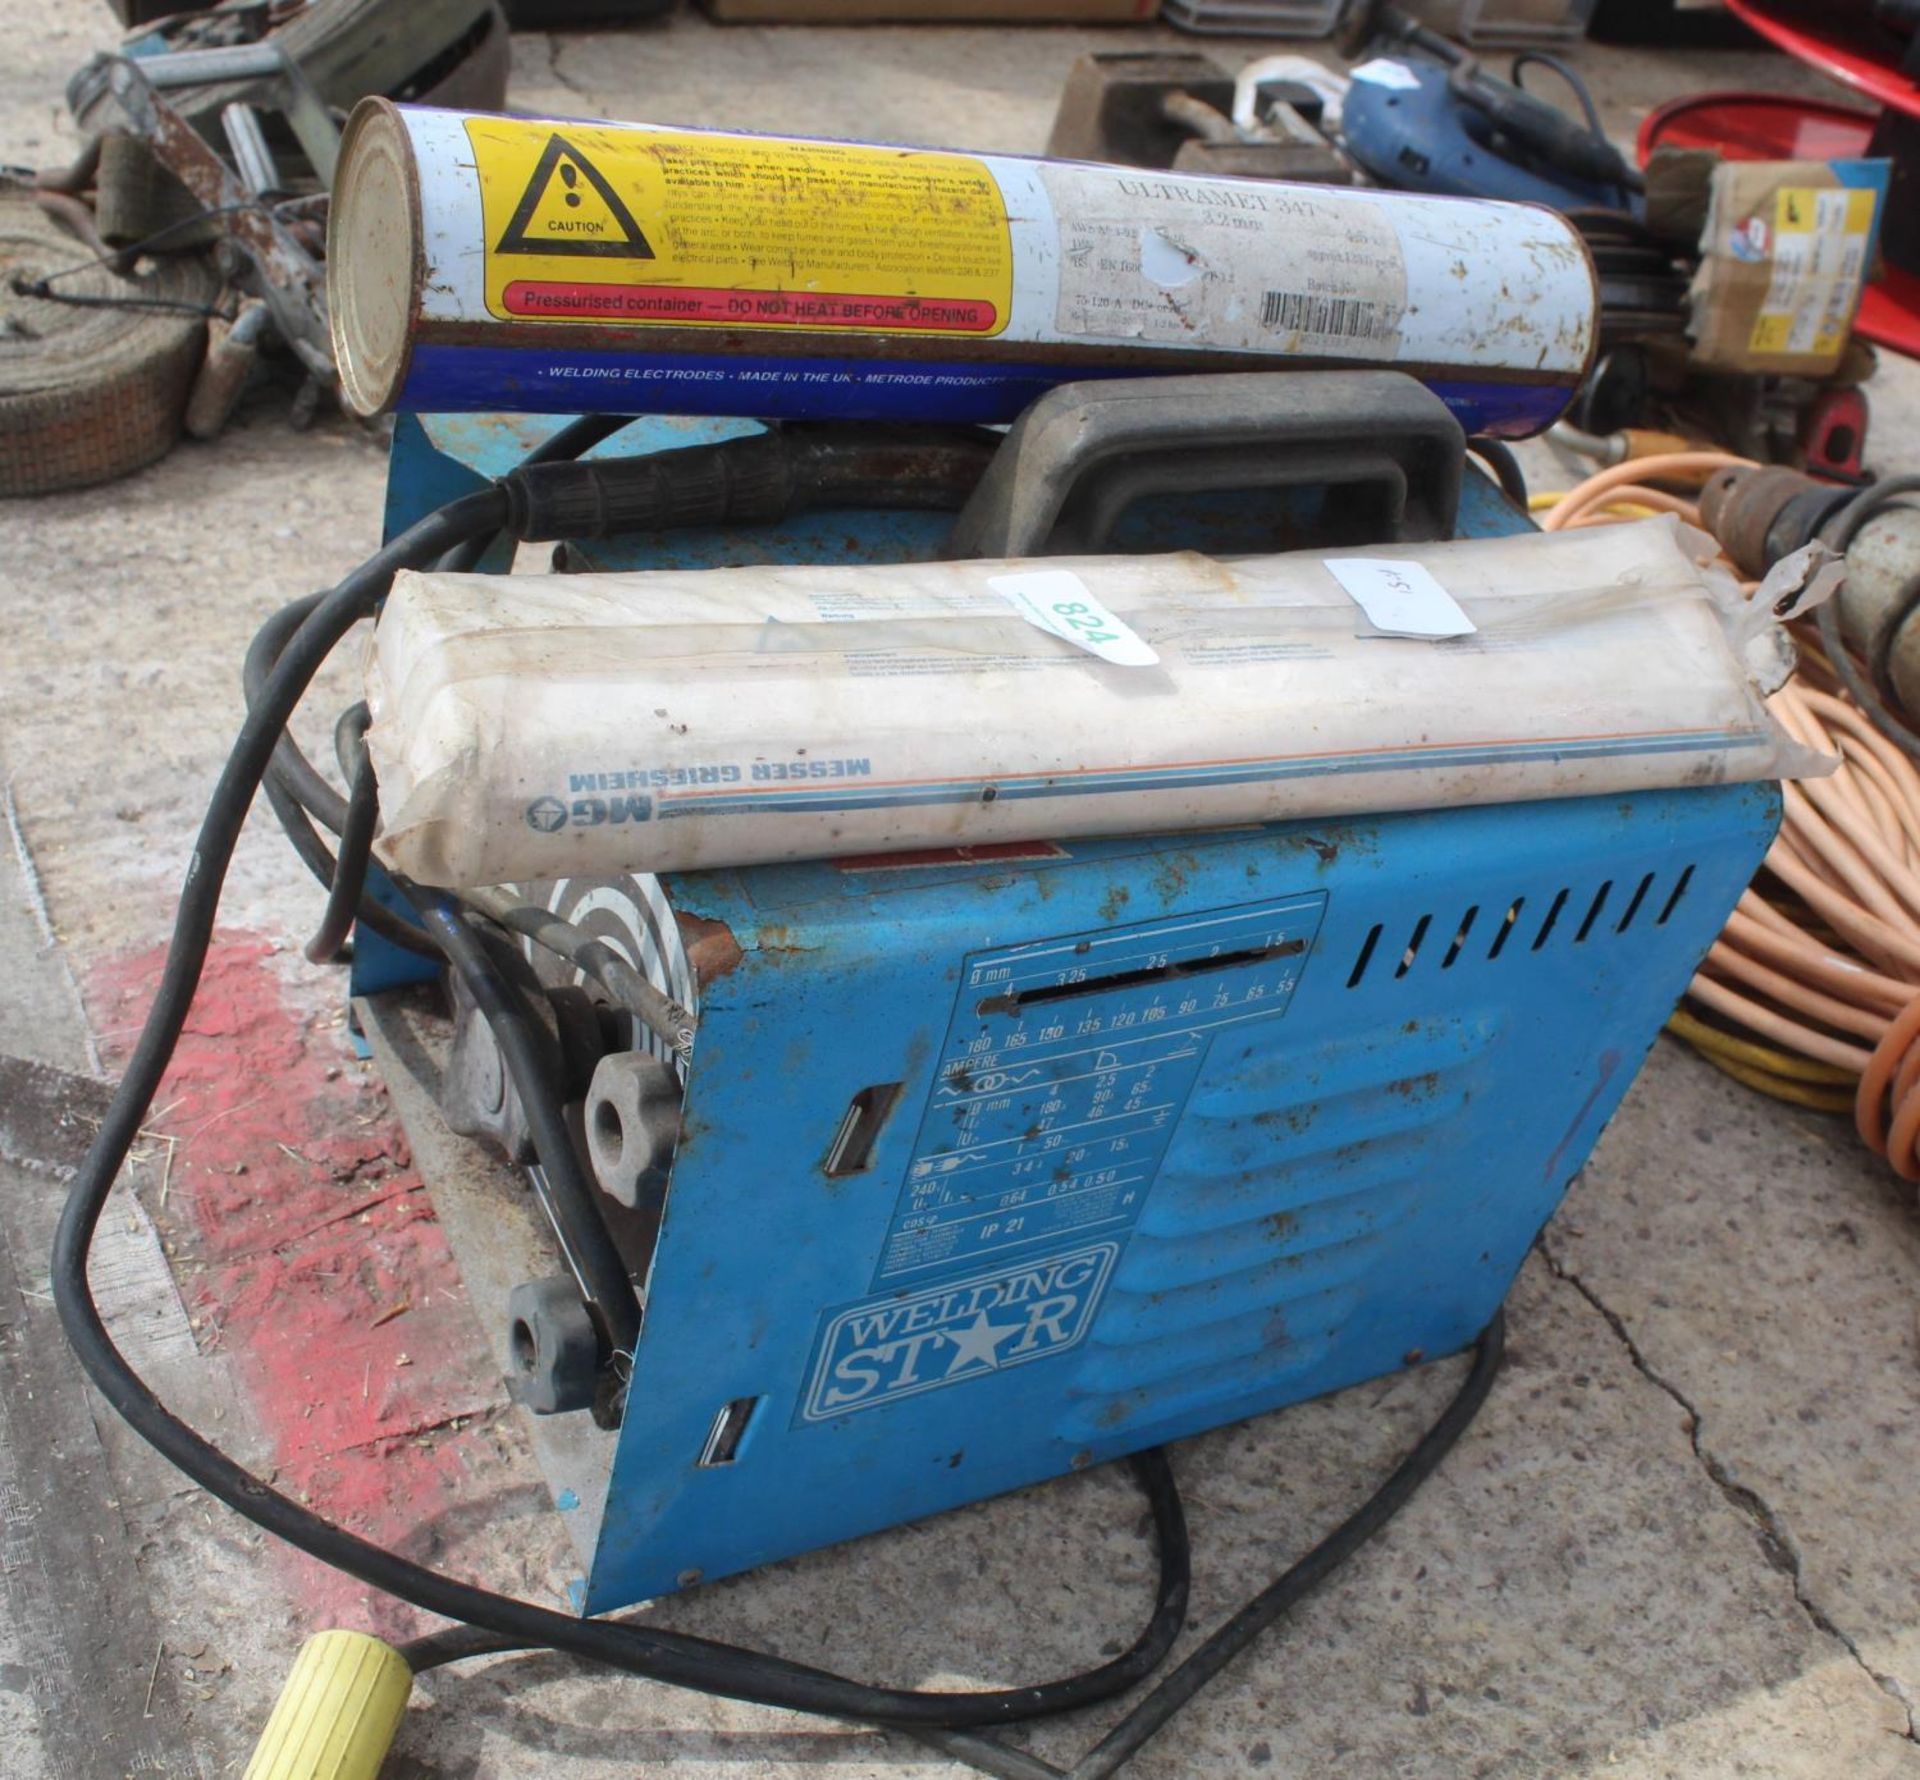 CEBORA DAMAS 80 WELDING STAR NO VAT FROM A SMALL DISPERSAL SALE - Image 2 of 2